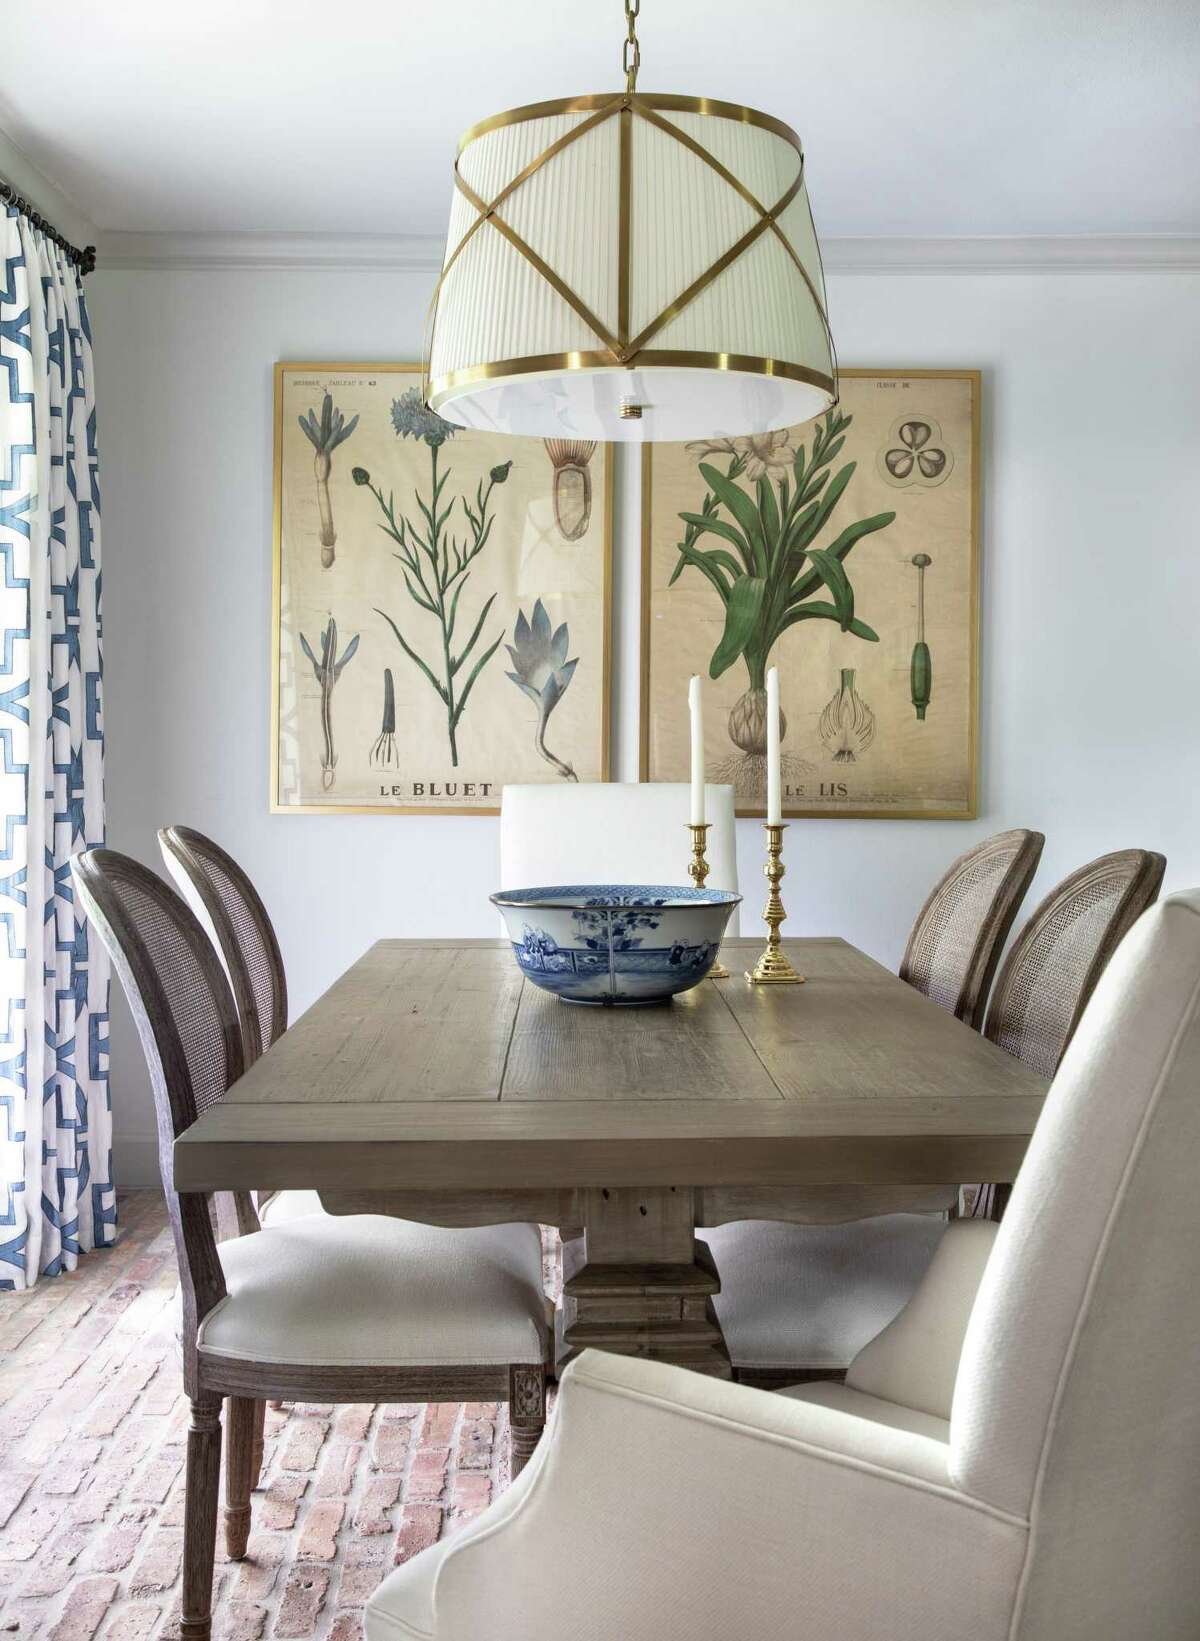 The casual breakfast area has blue-and-white print draperies. The fabric repeats in the kitchen window shade.